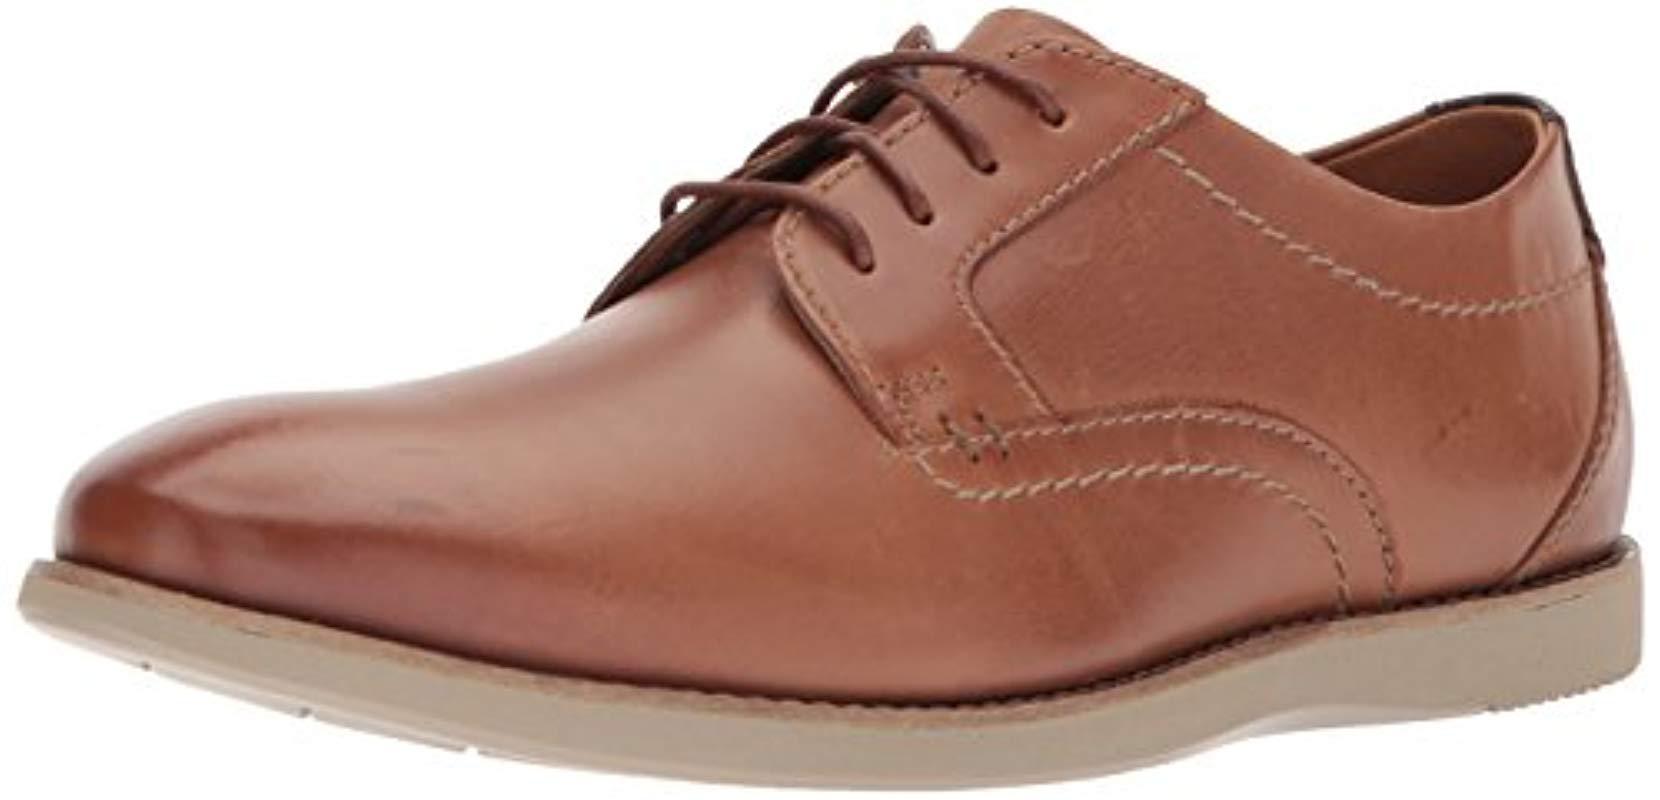 Clarks Leather Raharto Plain Oxford in Dark Tan Leather (Brown) for Men |  Lyst